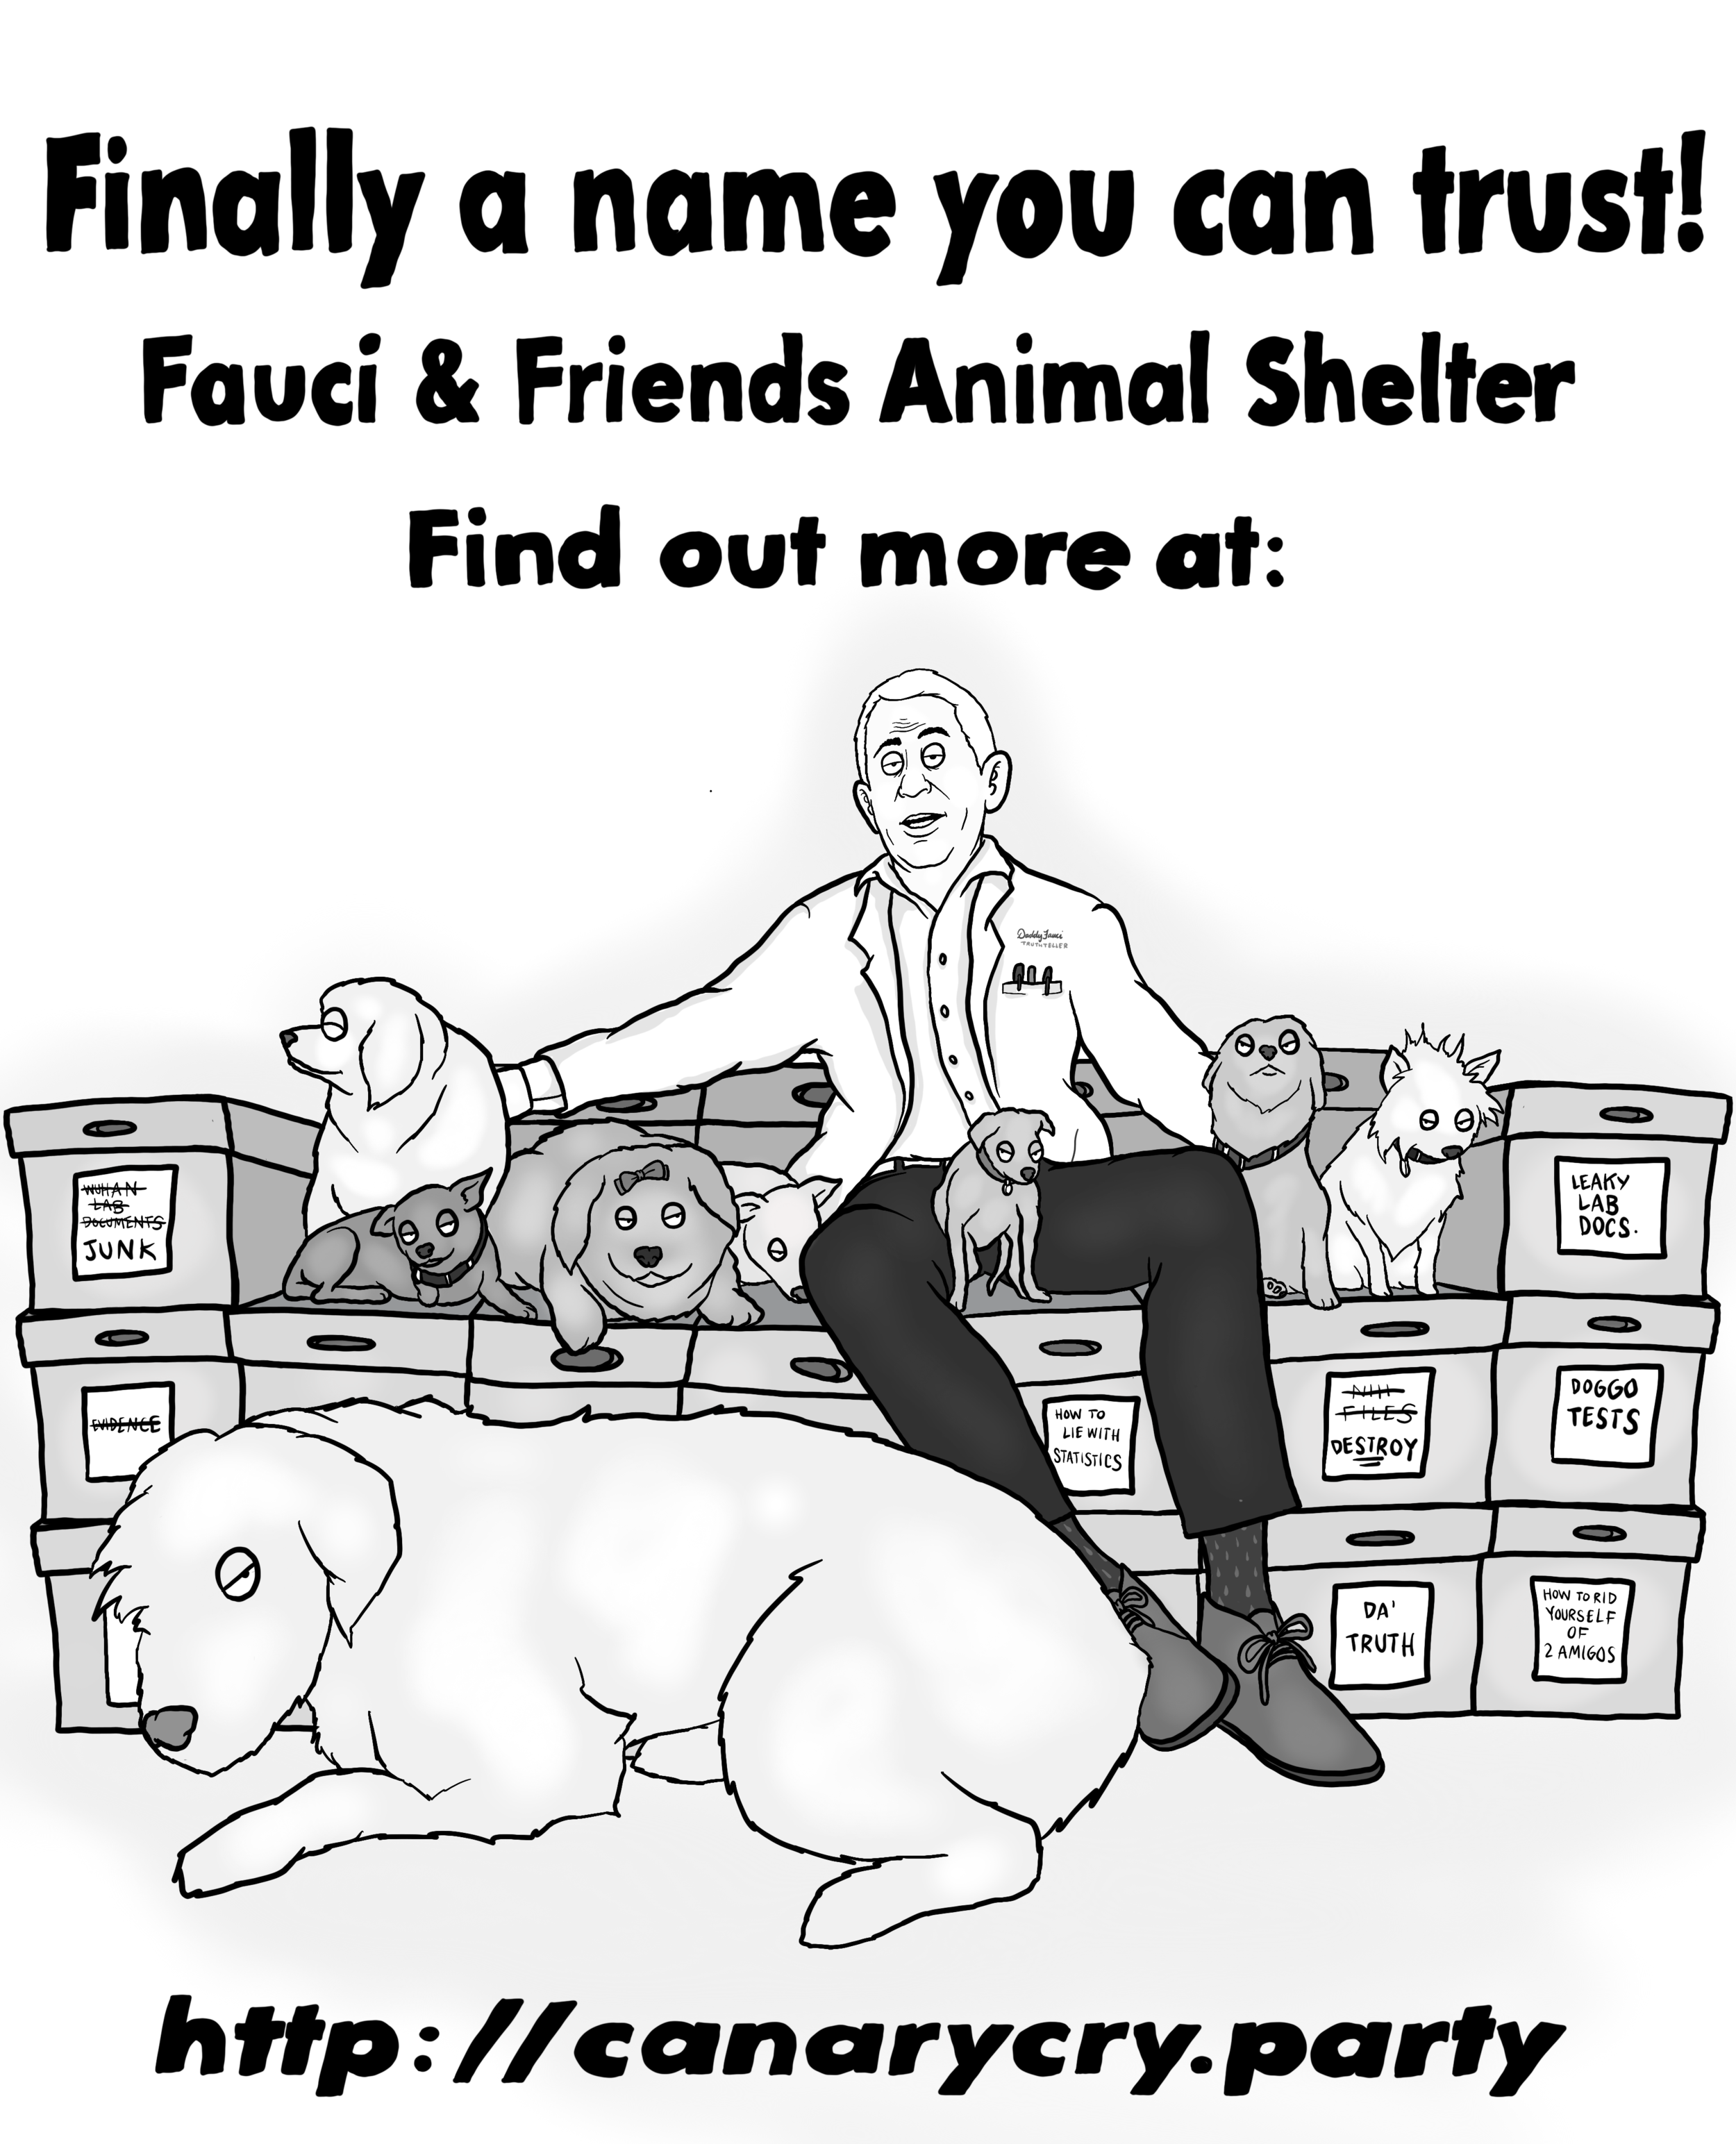 Fauci and Friends Animal Shelter